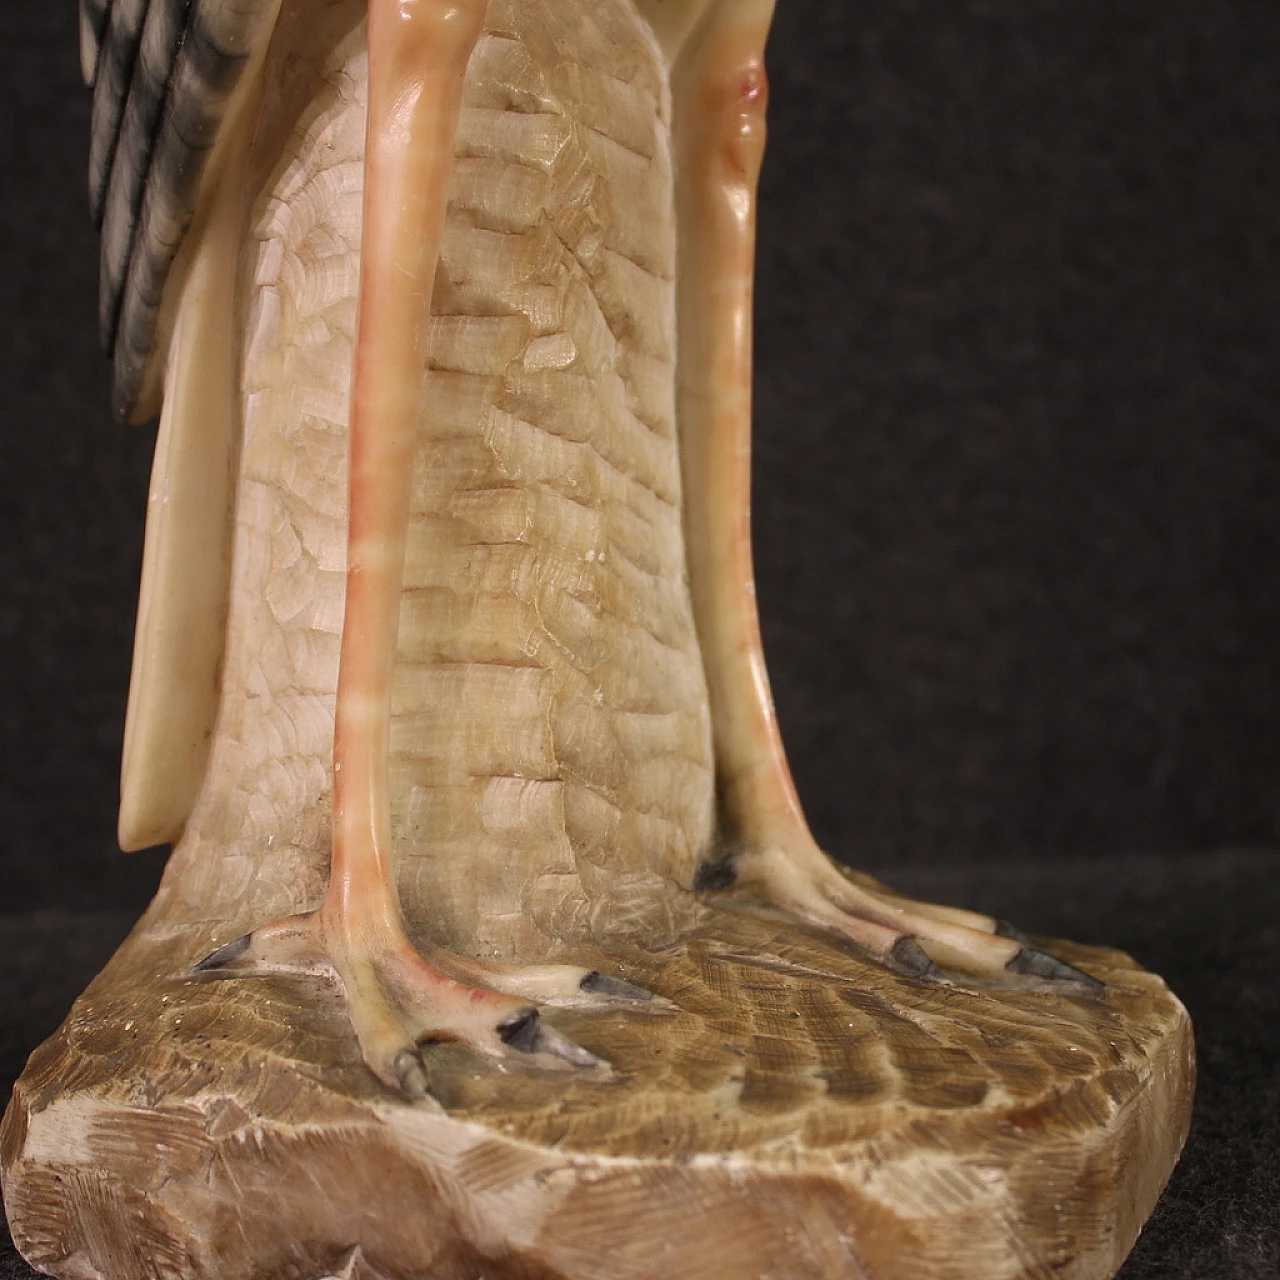 Heron, chiseled and patinated alabaster sculpture 10